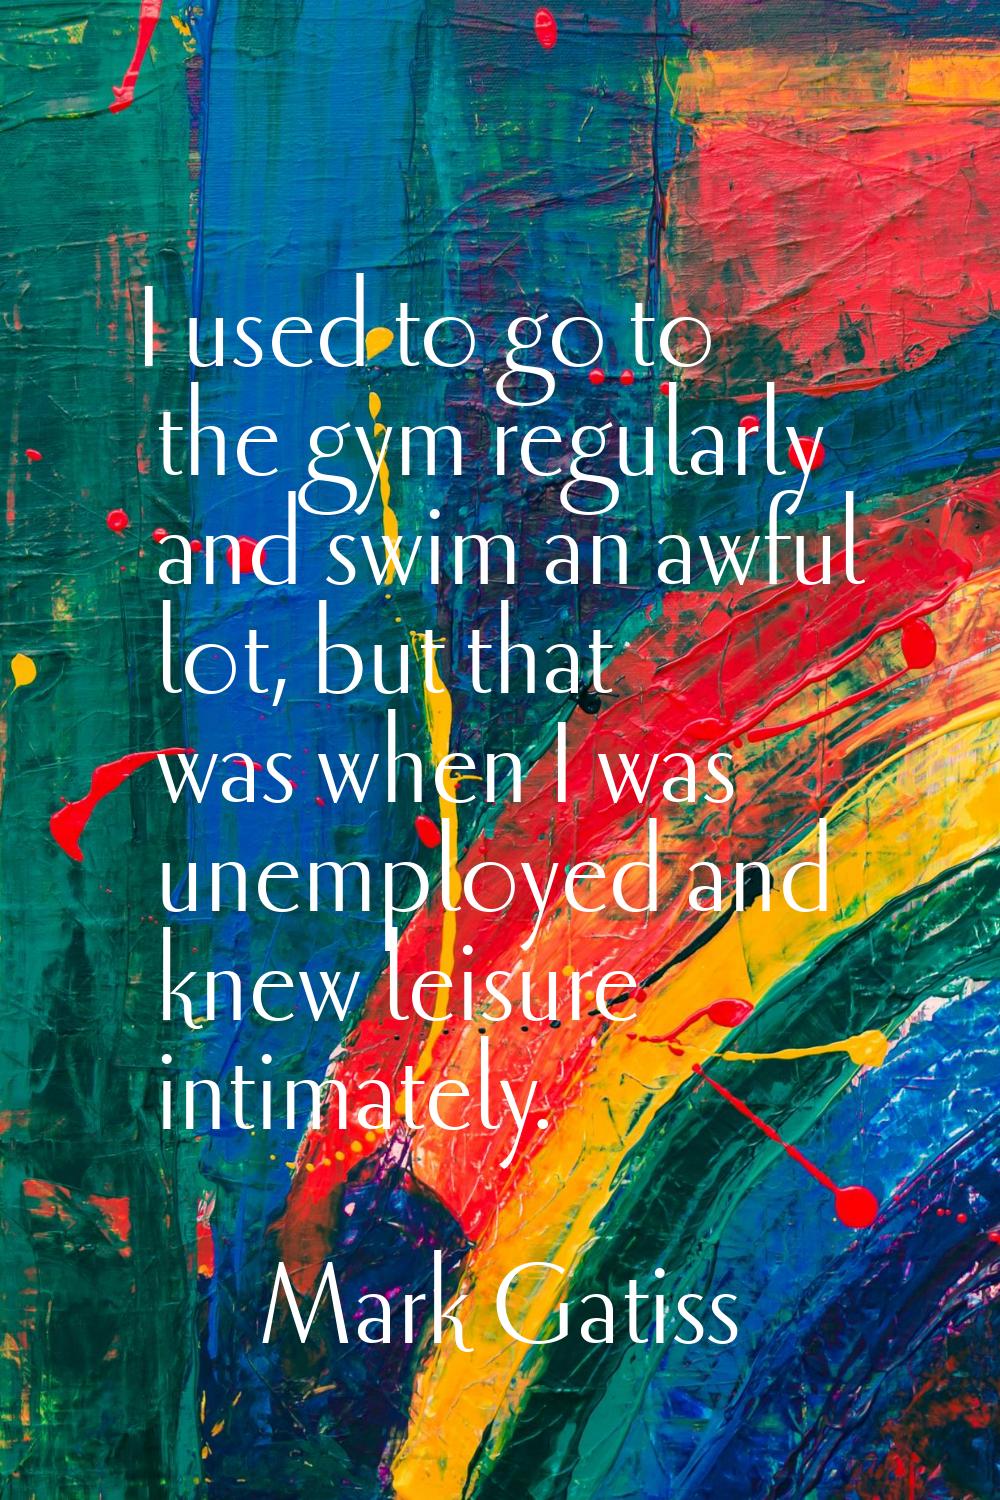 I used to go to the gym regularly and swim an awful lot, but that was when I was unemployed and kne